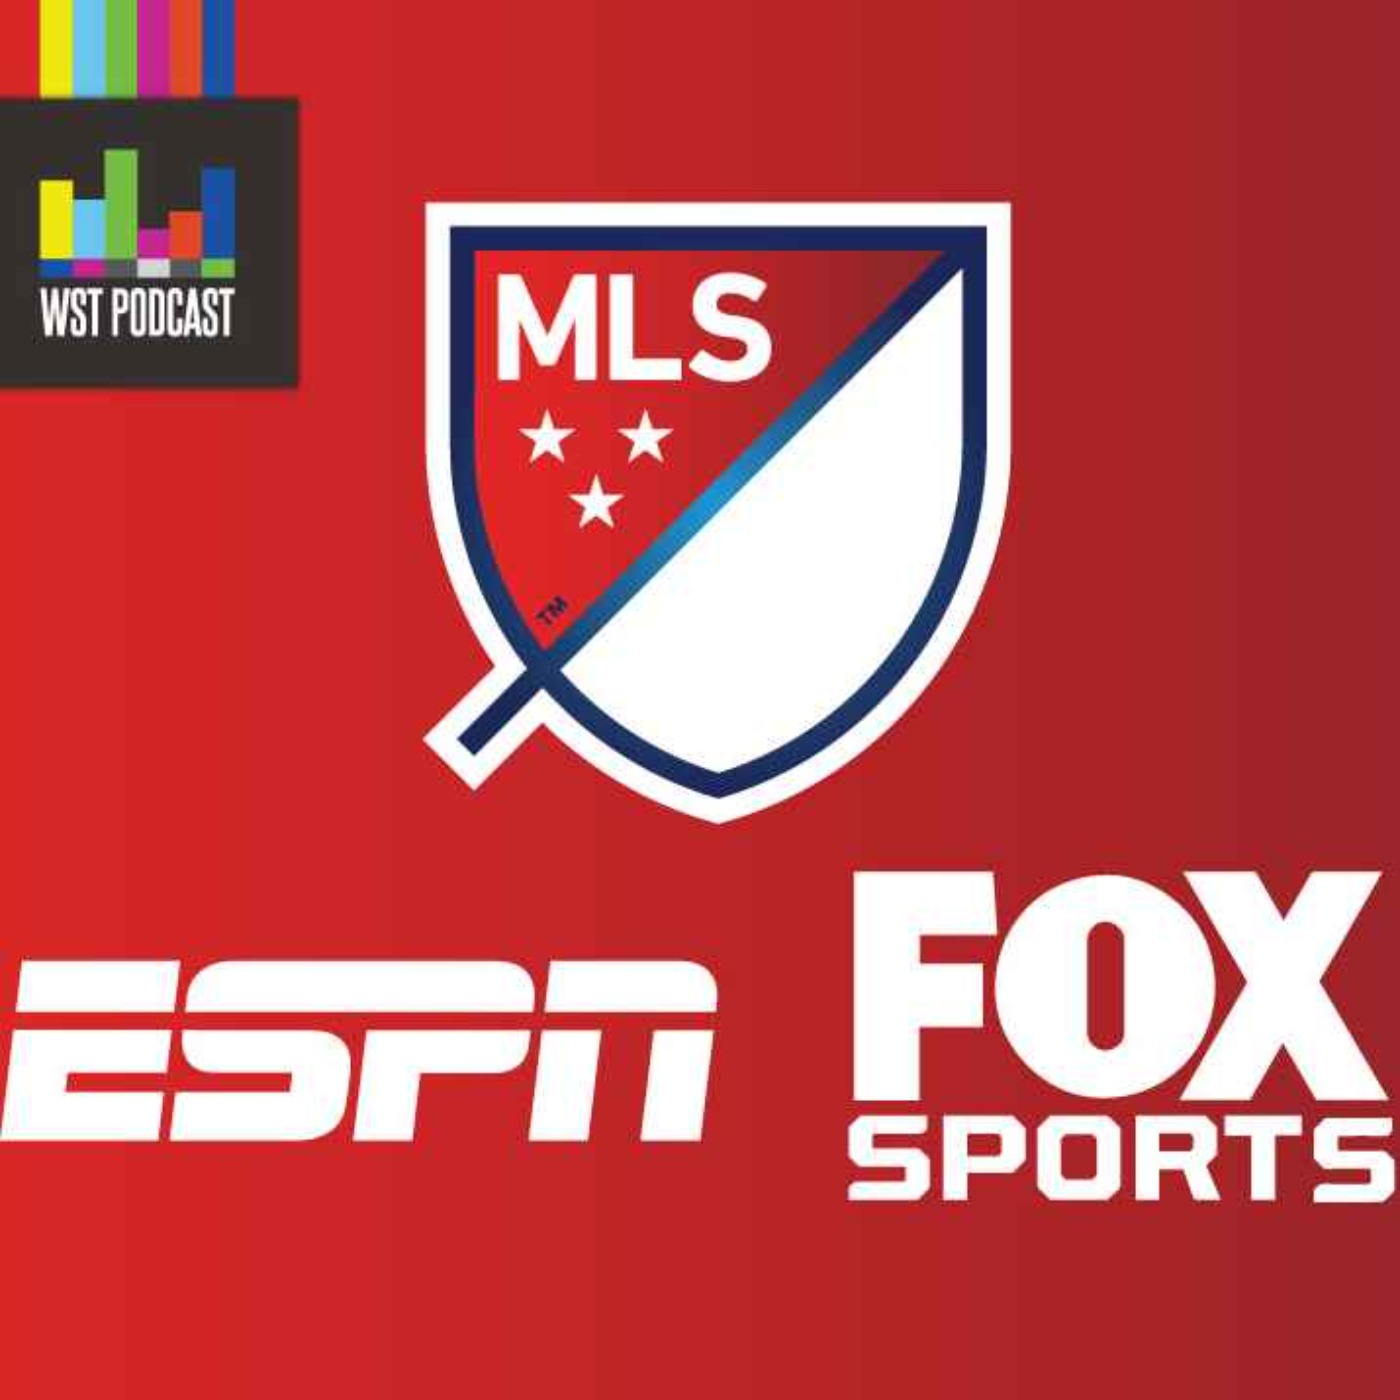 Big changes ahead for US Soccer and MLS